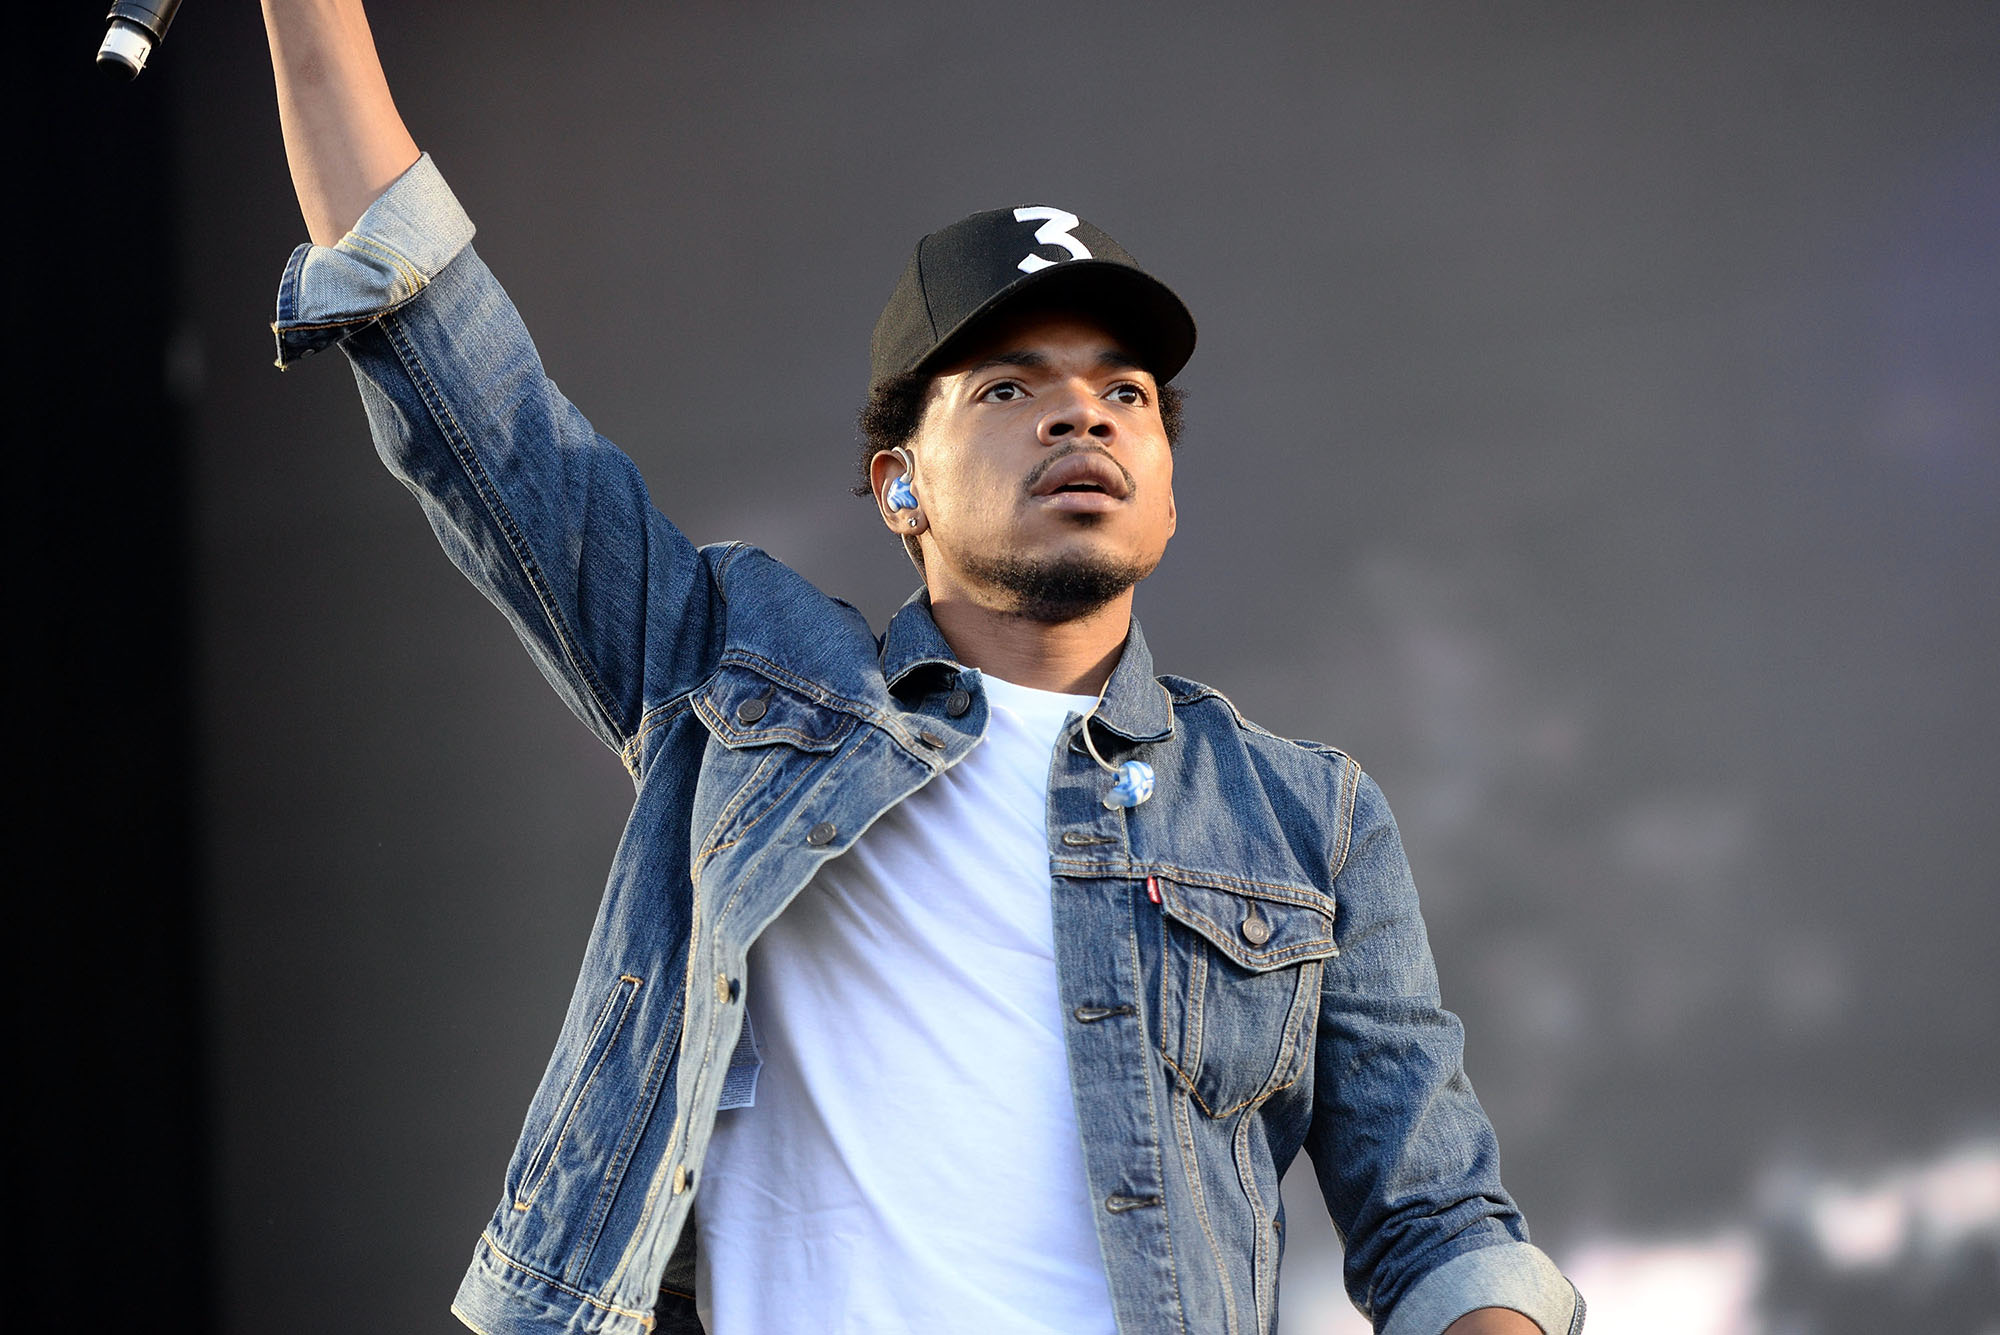 Chance the Rapper performs onstage during Outside Lands at Golden Gate Park on August 7, 2016 in San Francisco, California.  (Photo by Scott Dudelson/Getty Images) (Scott Dudelson—Getty Images)